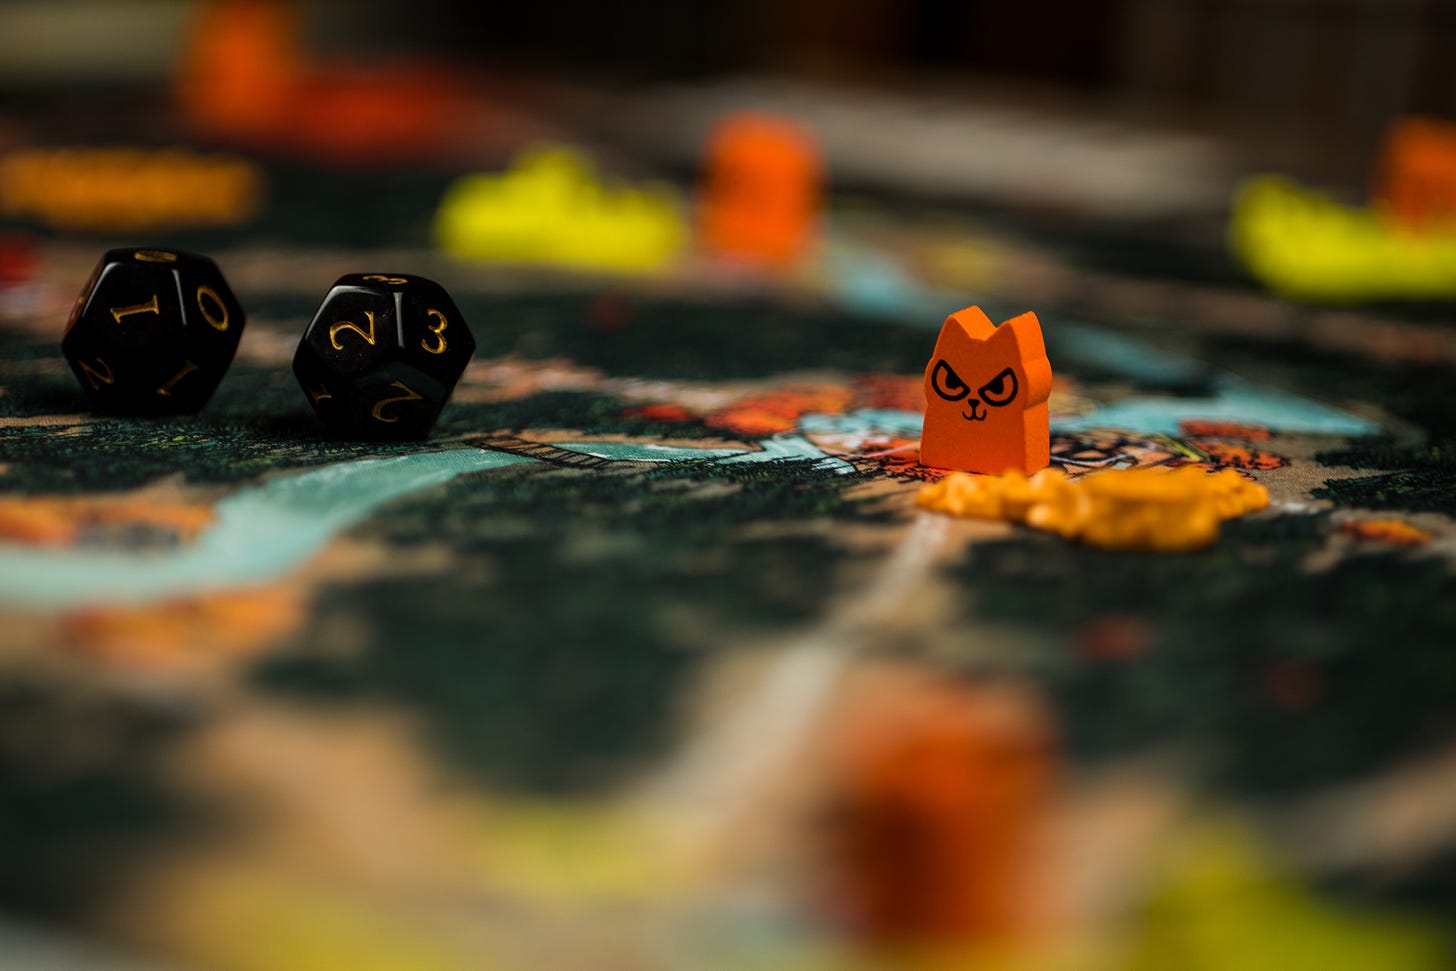 A cat token is placed in a clearing in the board game Root.